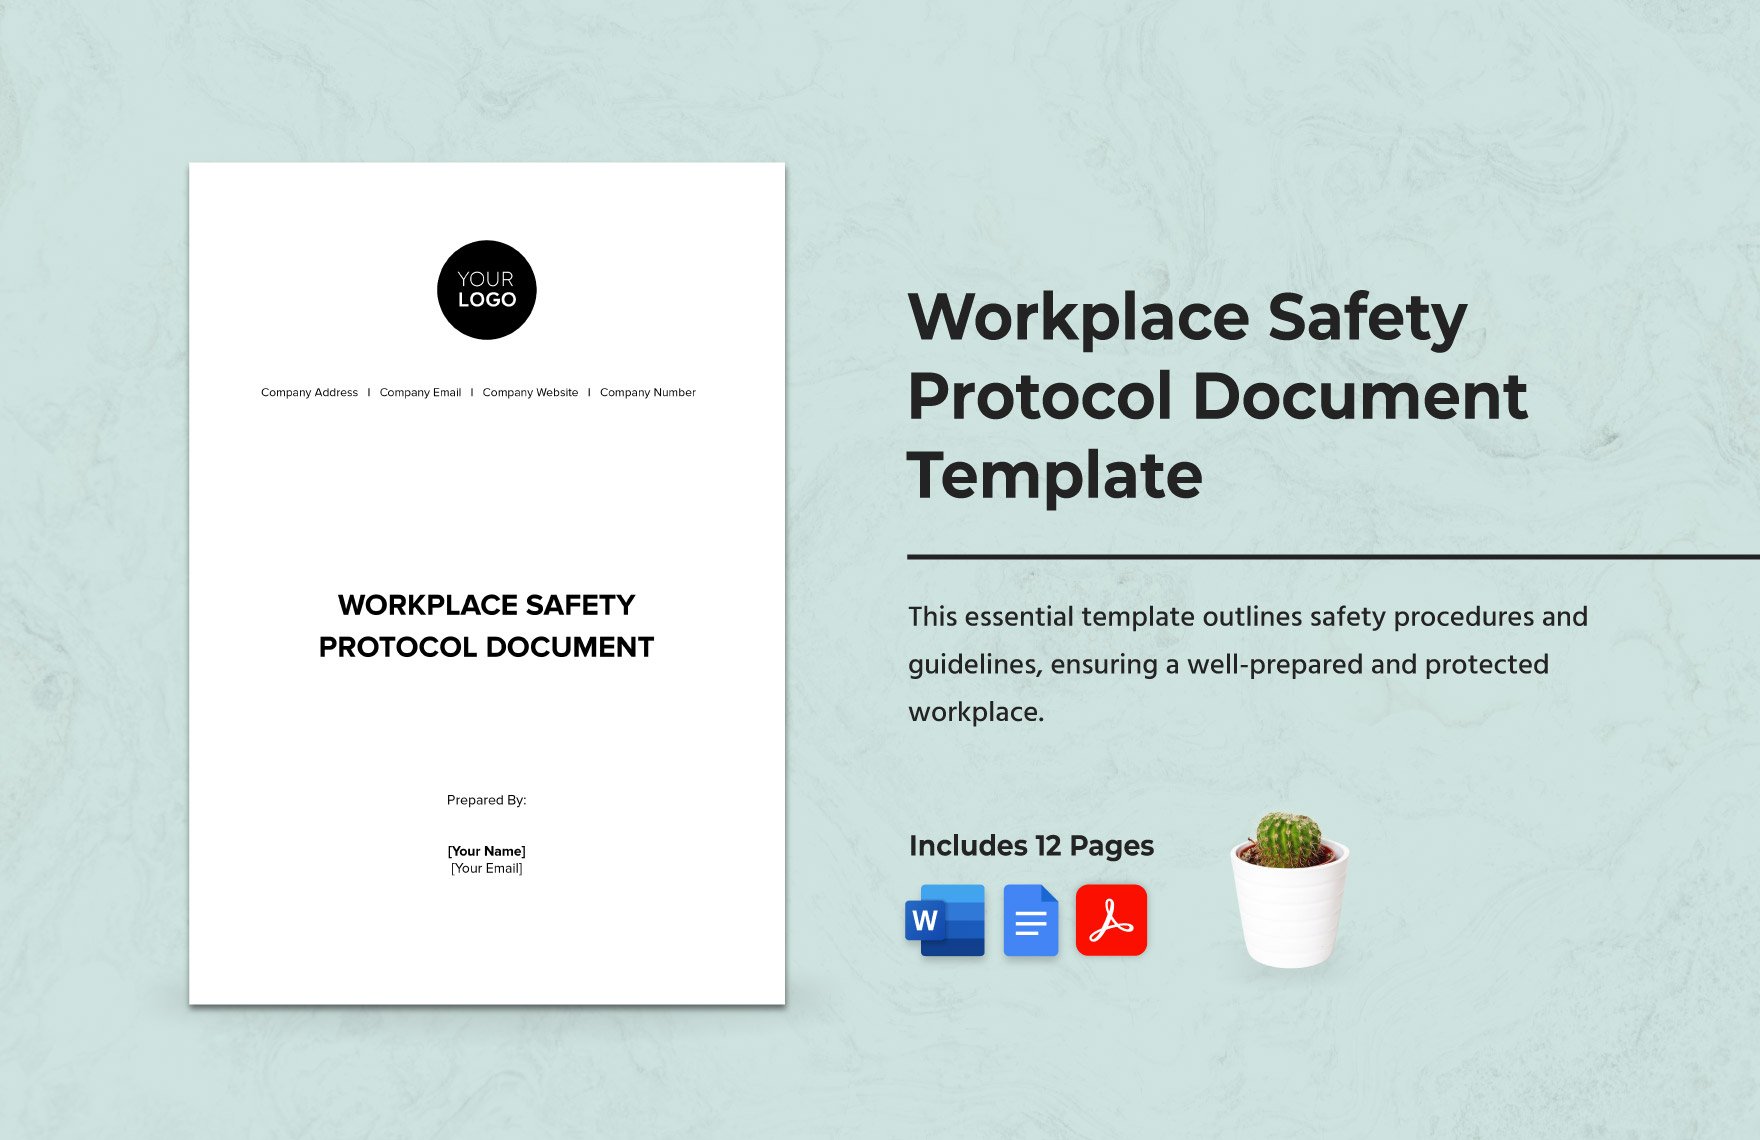 Workplace Safety Protocol Document Template in Word, Google Docs, PDF